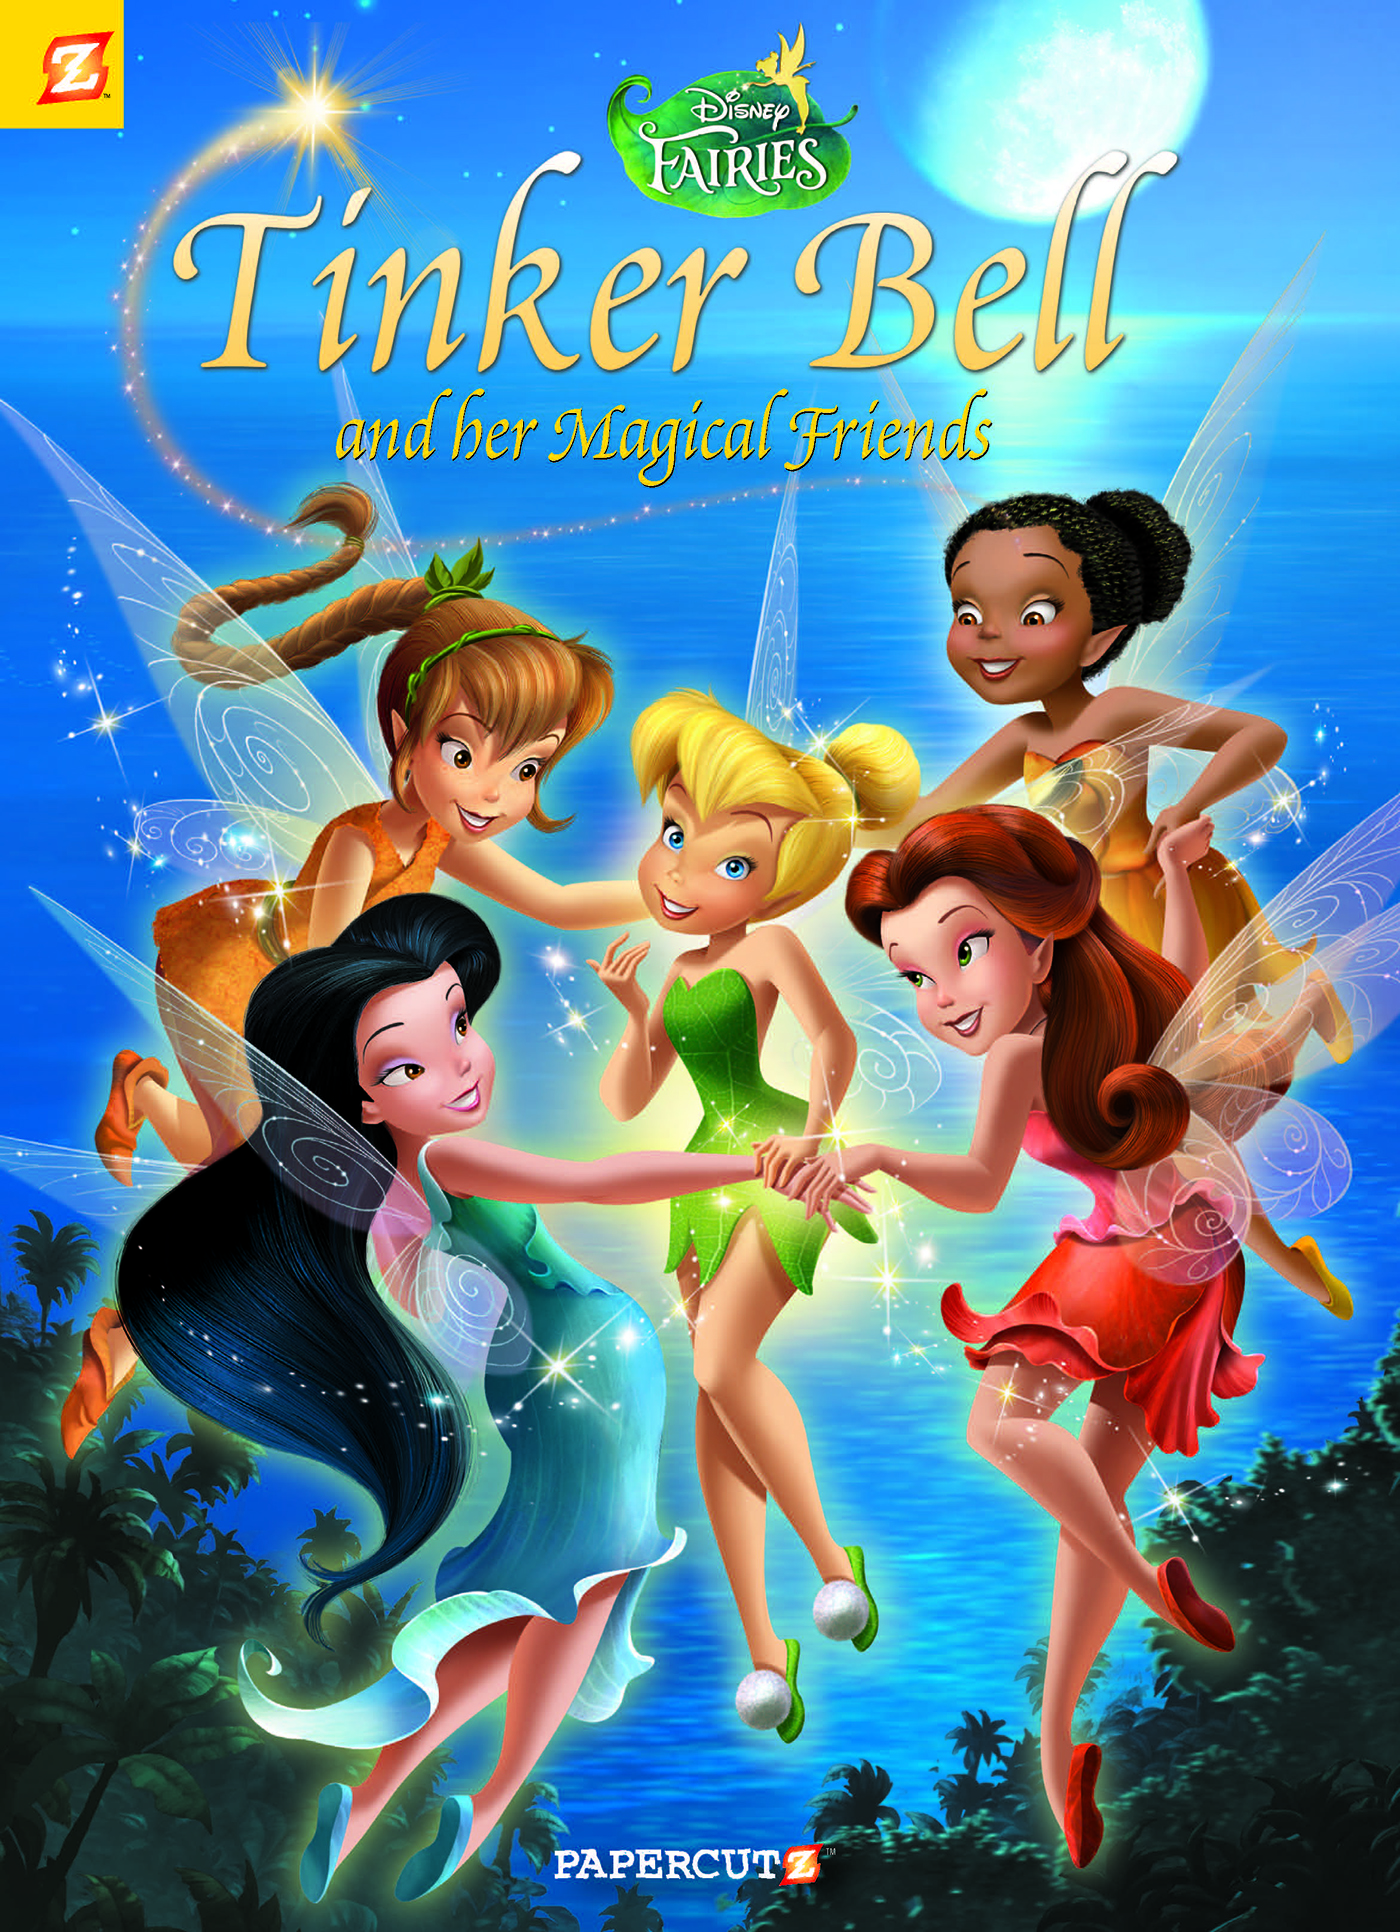 Disney Fairies #18: “Tinker Bell and her Magical Friends”